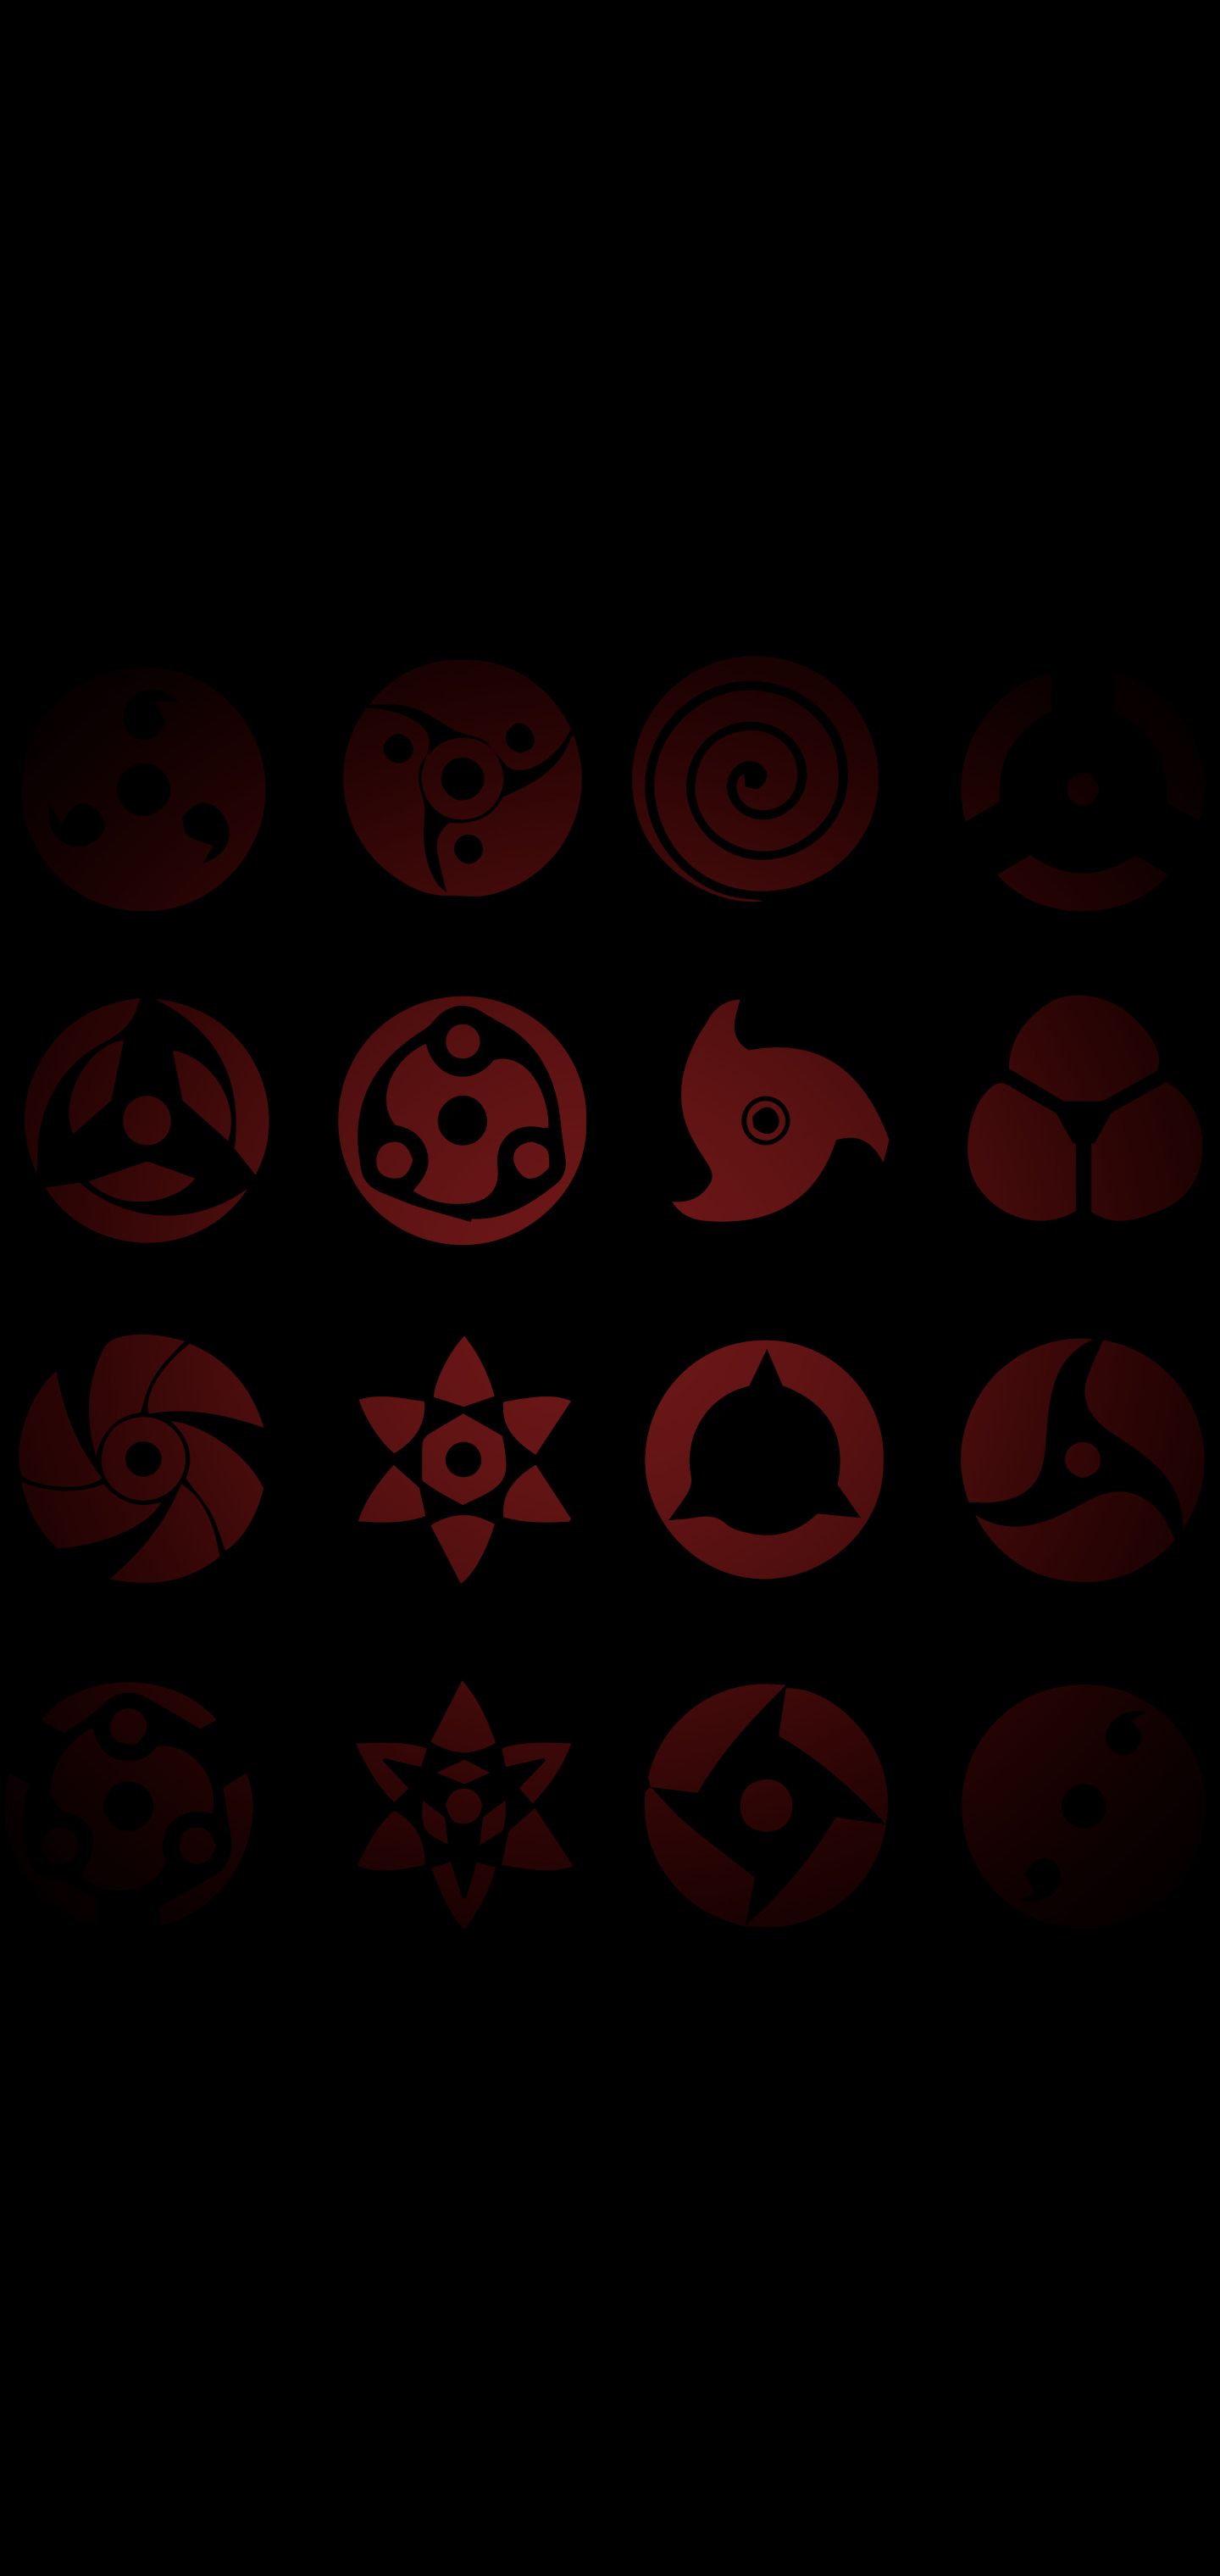 So i made this Sharingans Wallpaper and maybe there are other Naruto fans out there that will like it